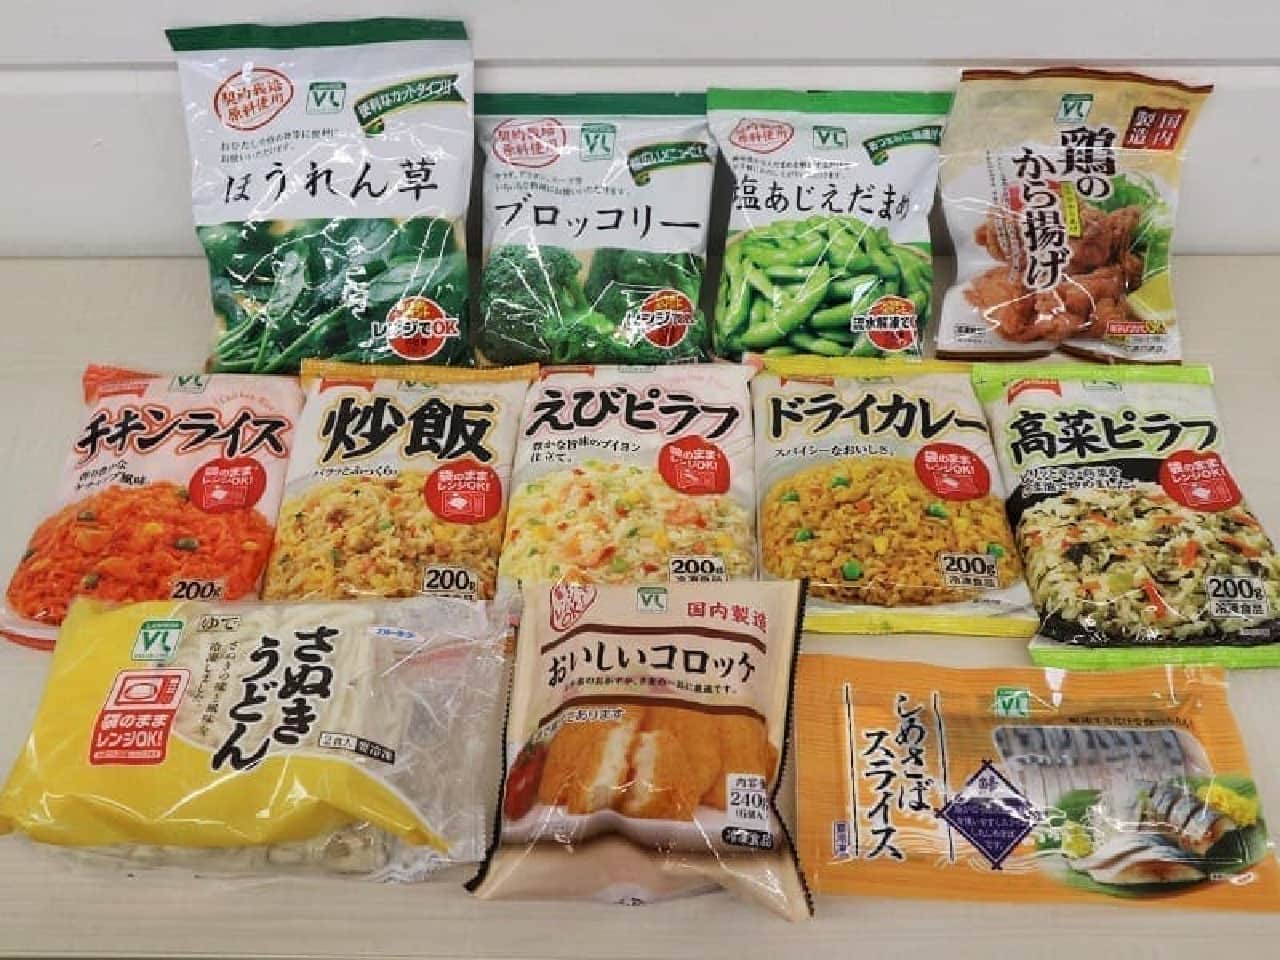 The best-selling "100 yen frozen food" in 2020 at Lawson Store 100